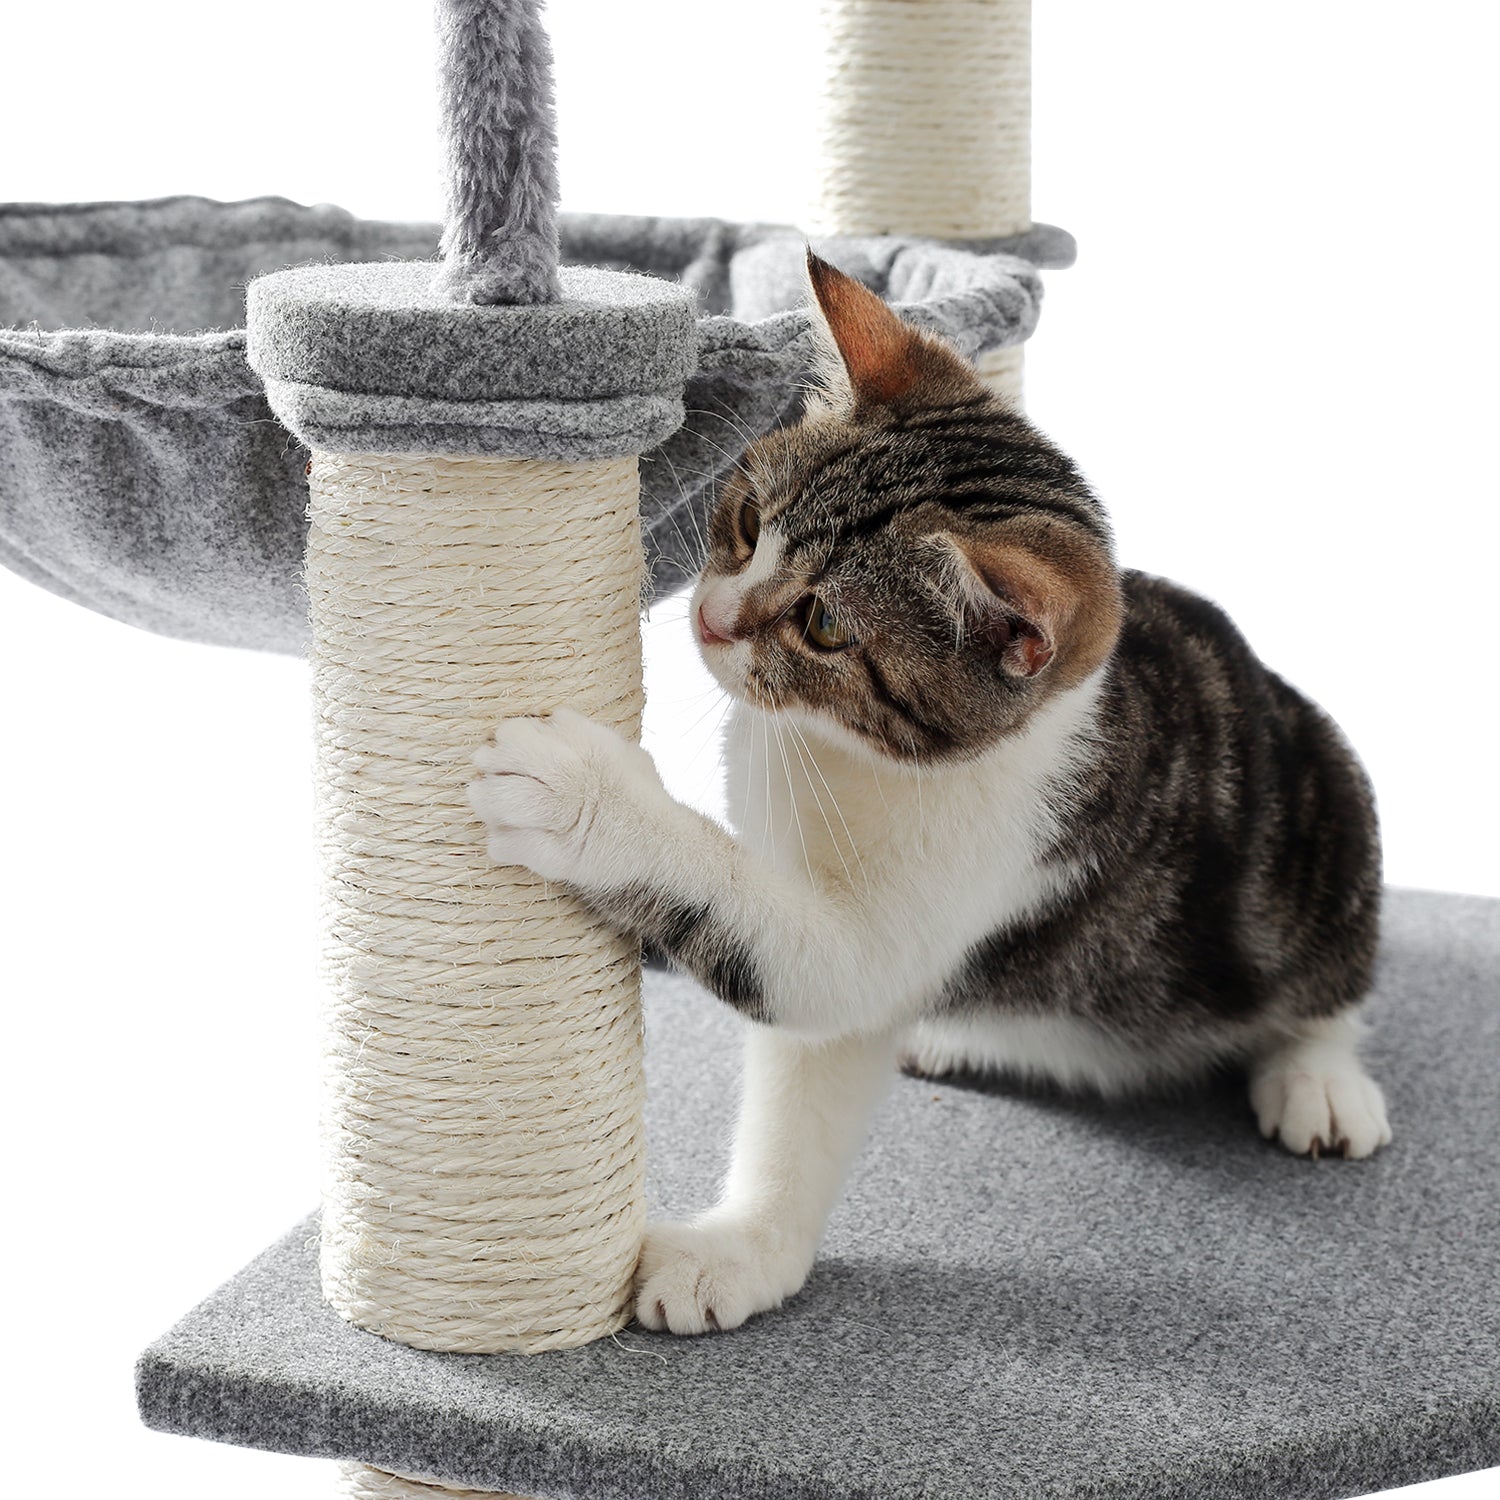 7 Levels 50 Inch Modern Cat Tree Cat Tower with Natural Scratching Posts,Cozy Condo and Extra-Large Top Perch Grey